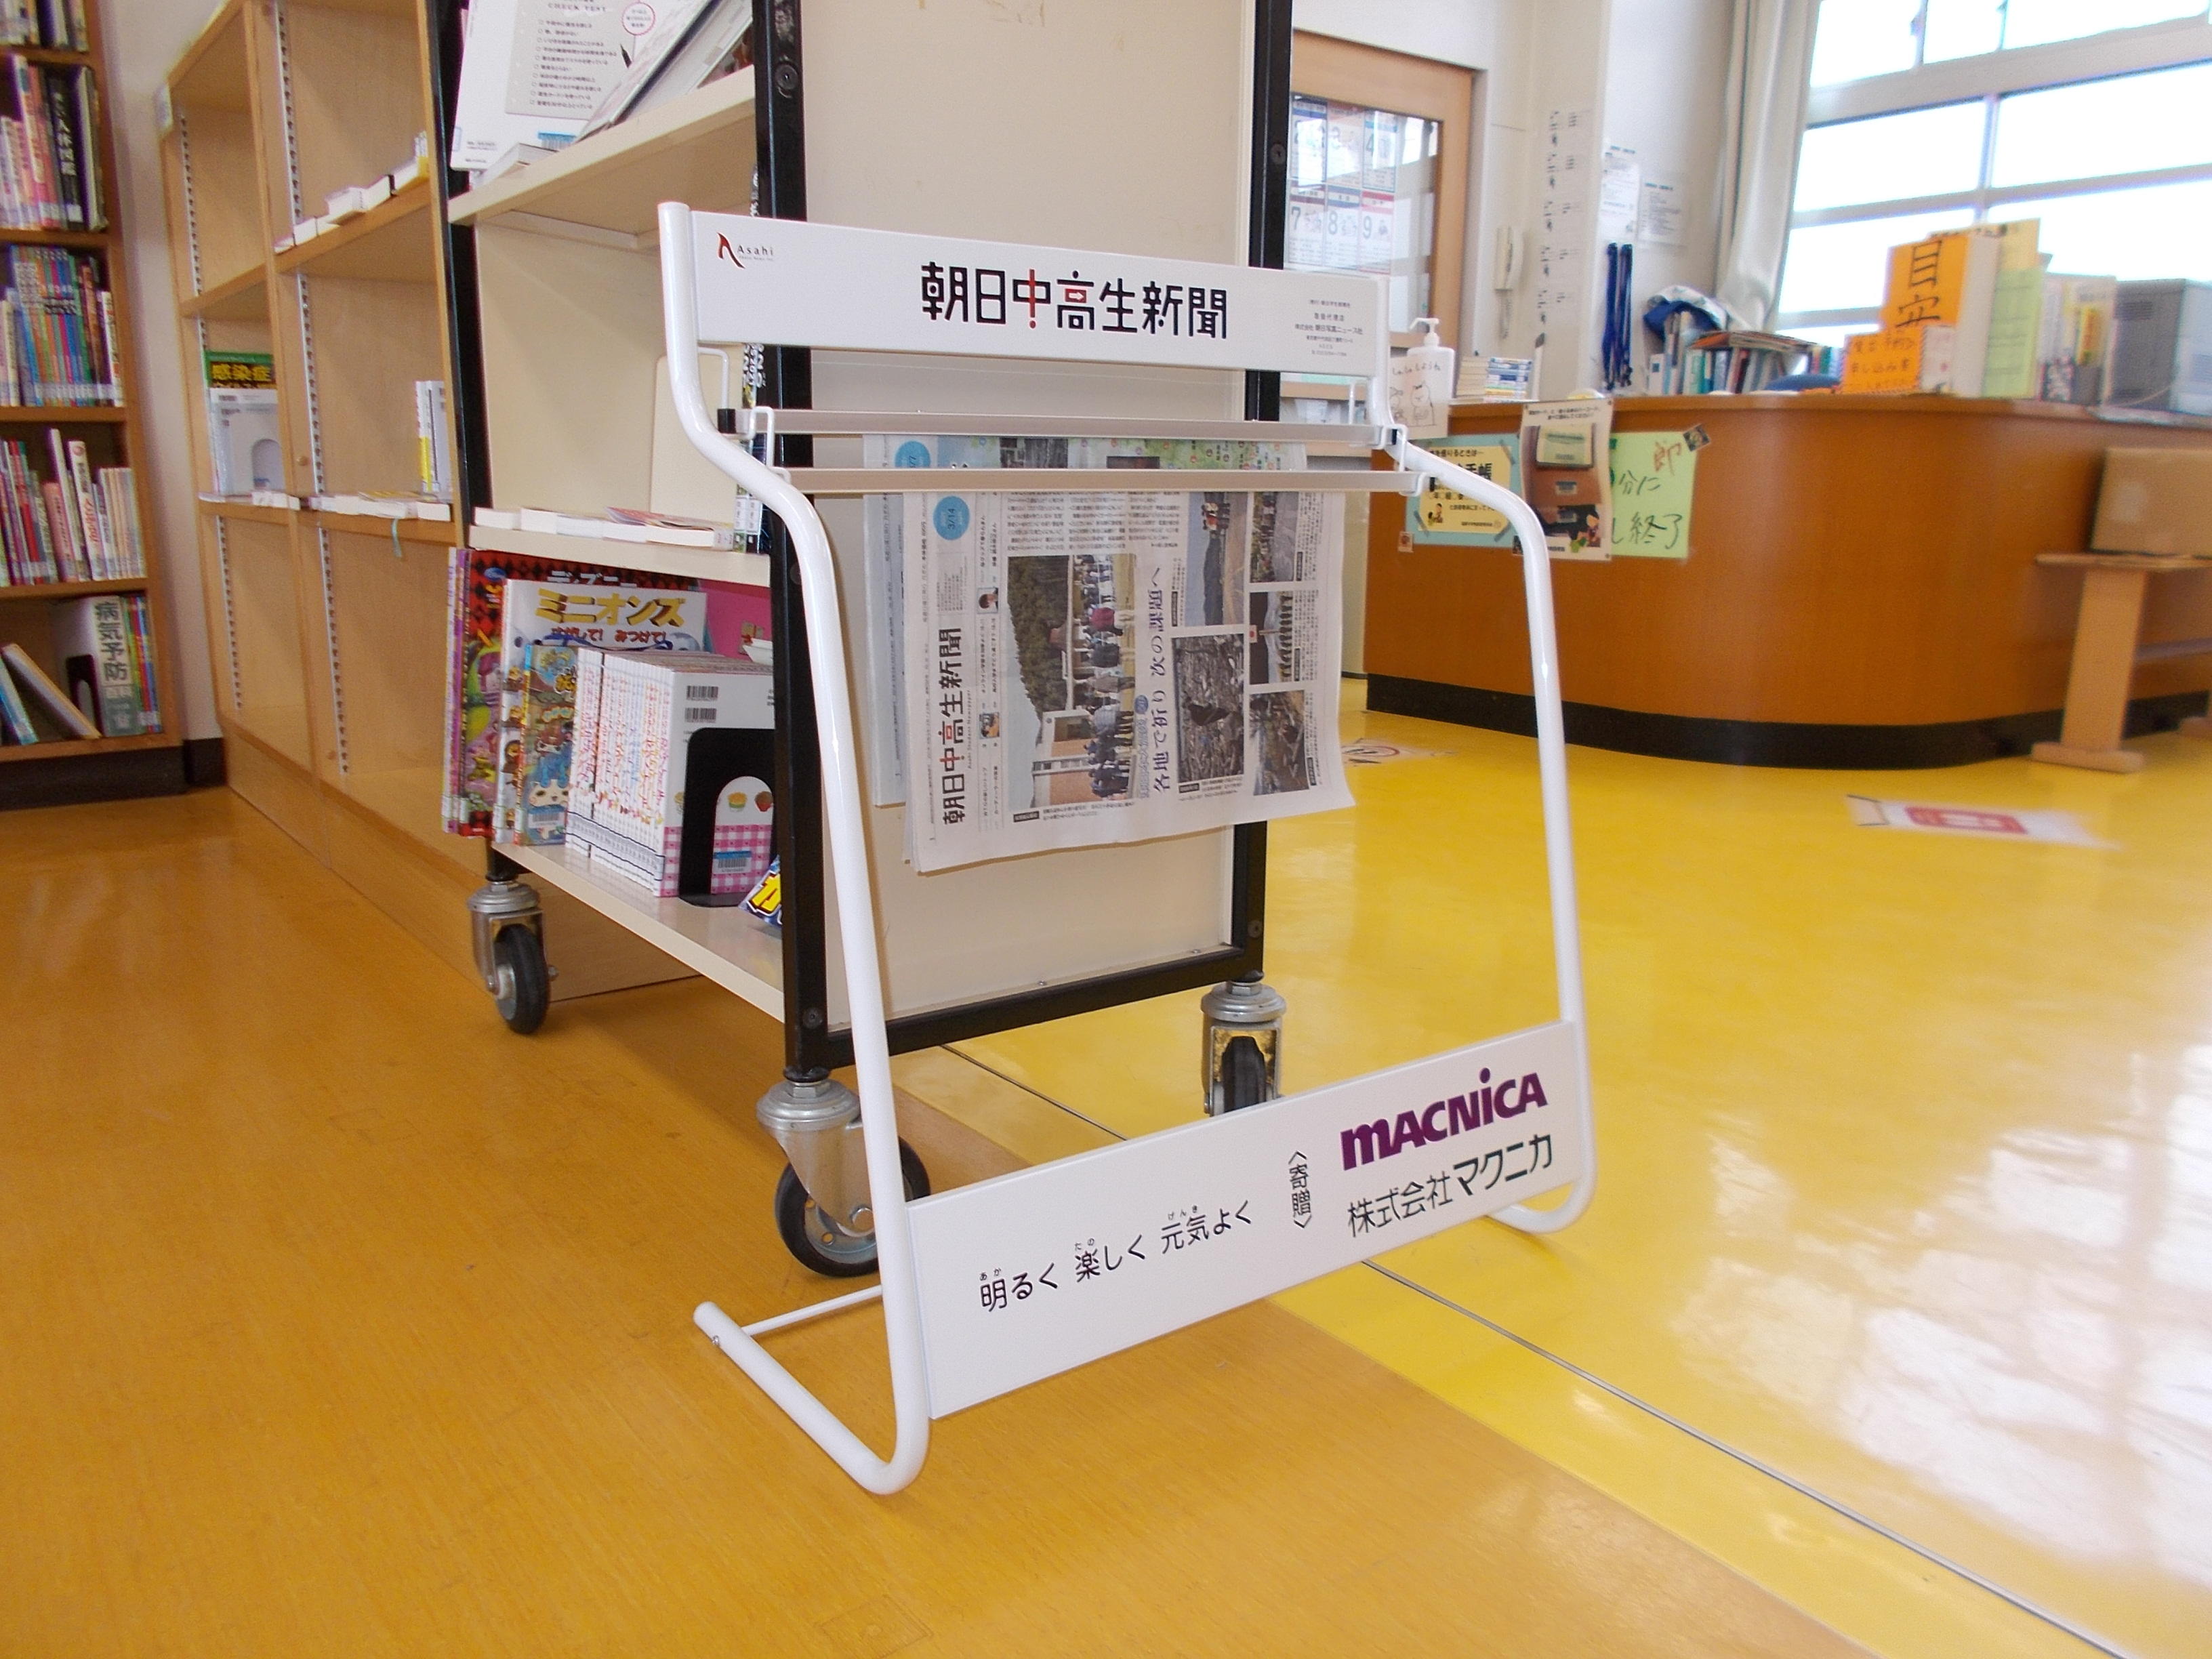 Donating a newspaper rack to Shinohara Middle School